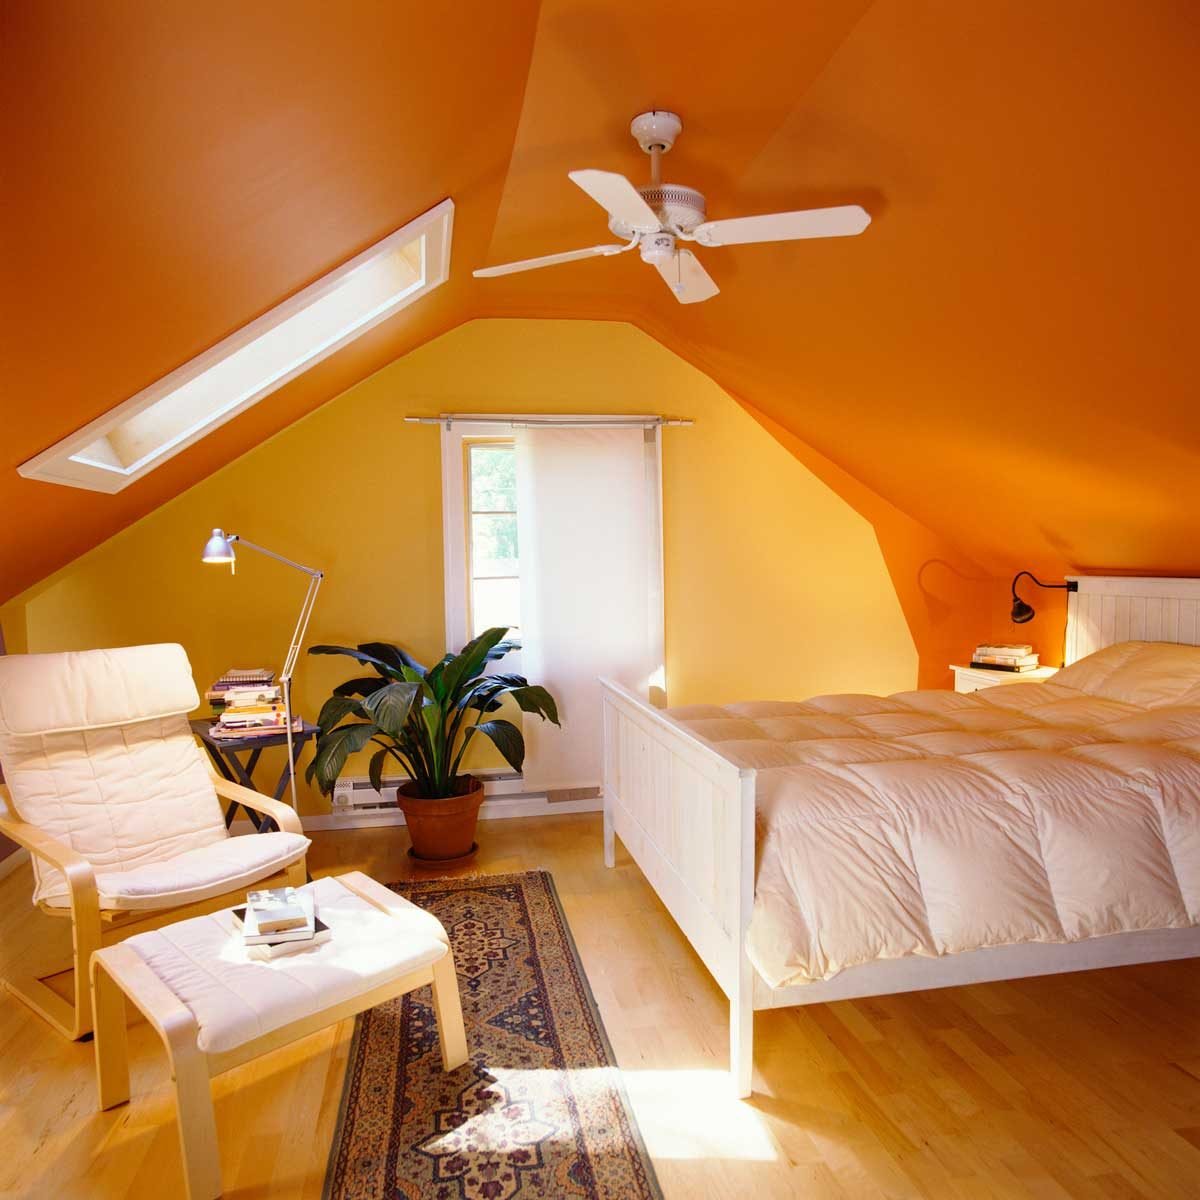 8 Styles of Ceiling Fans to Beat the Heat